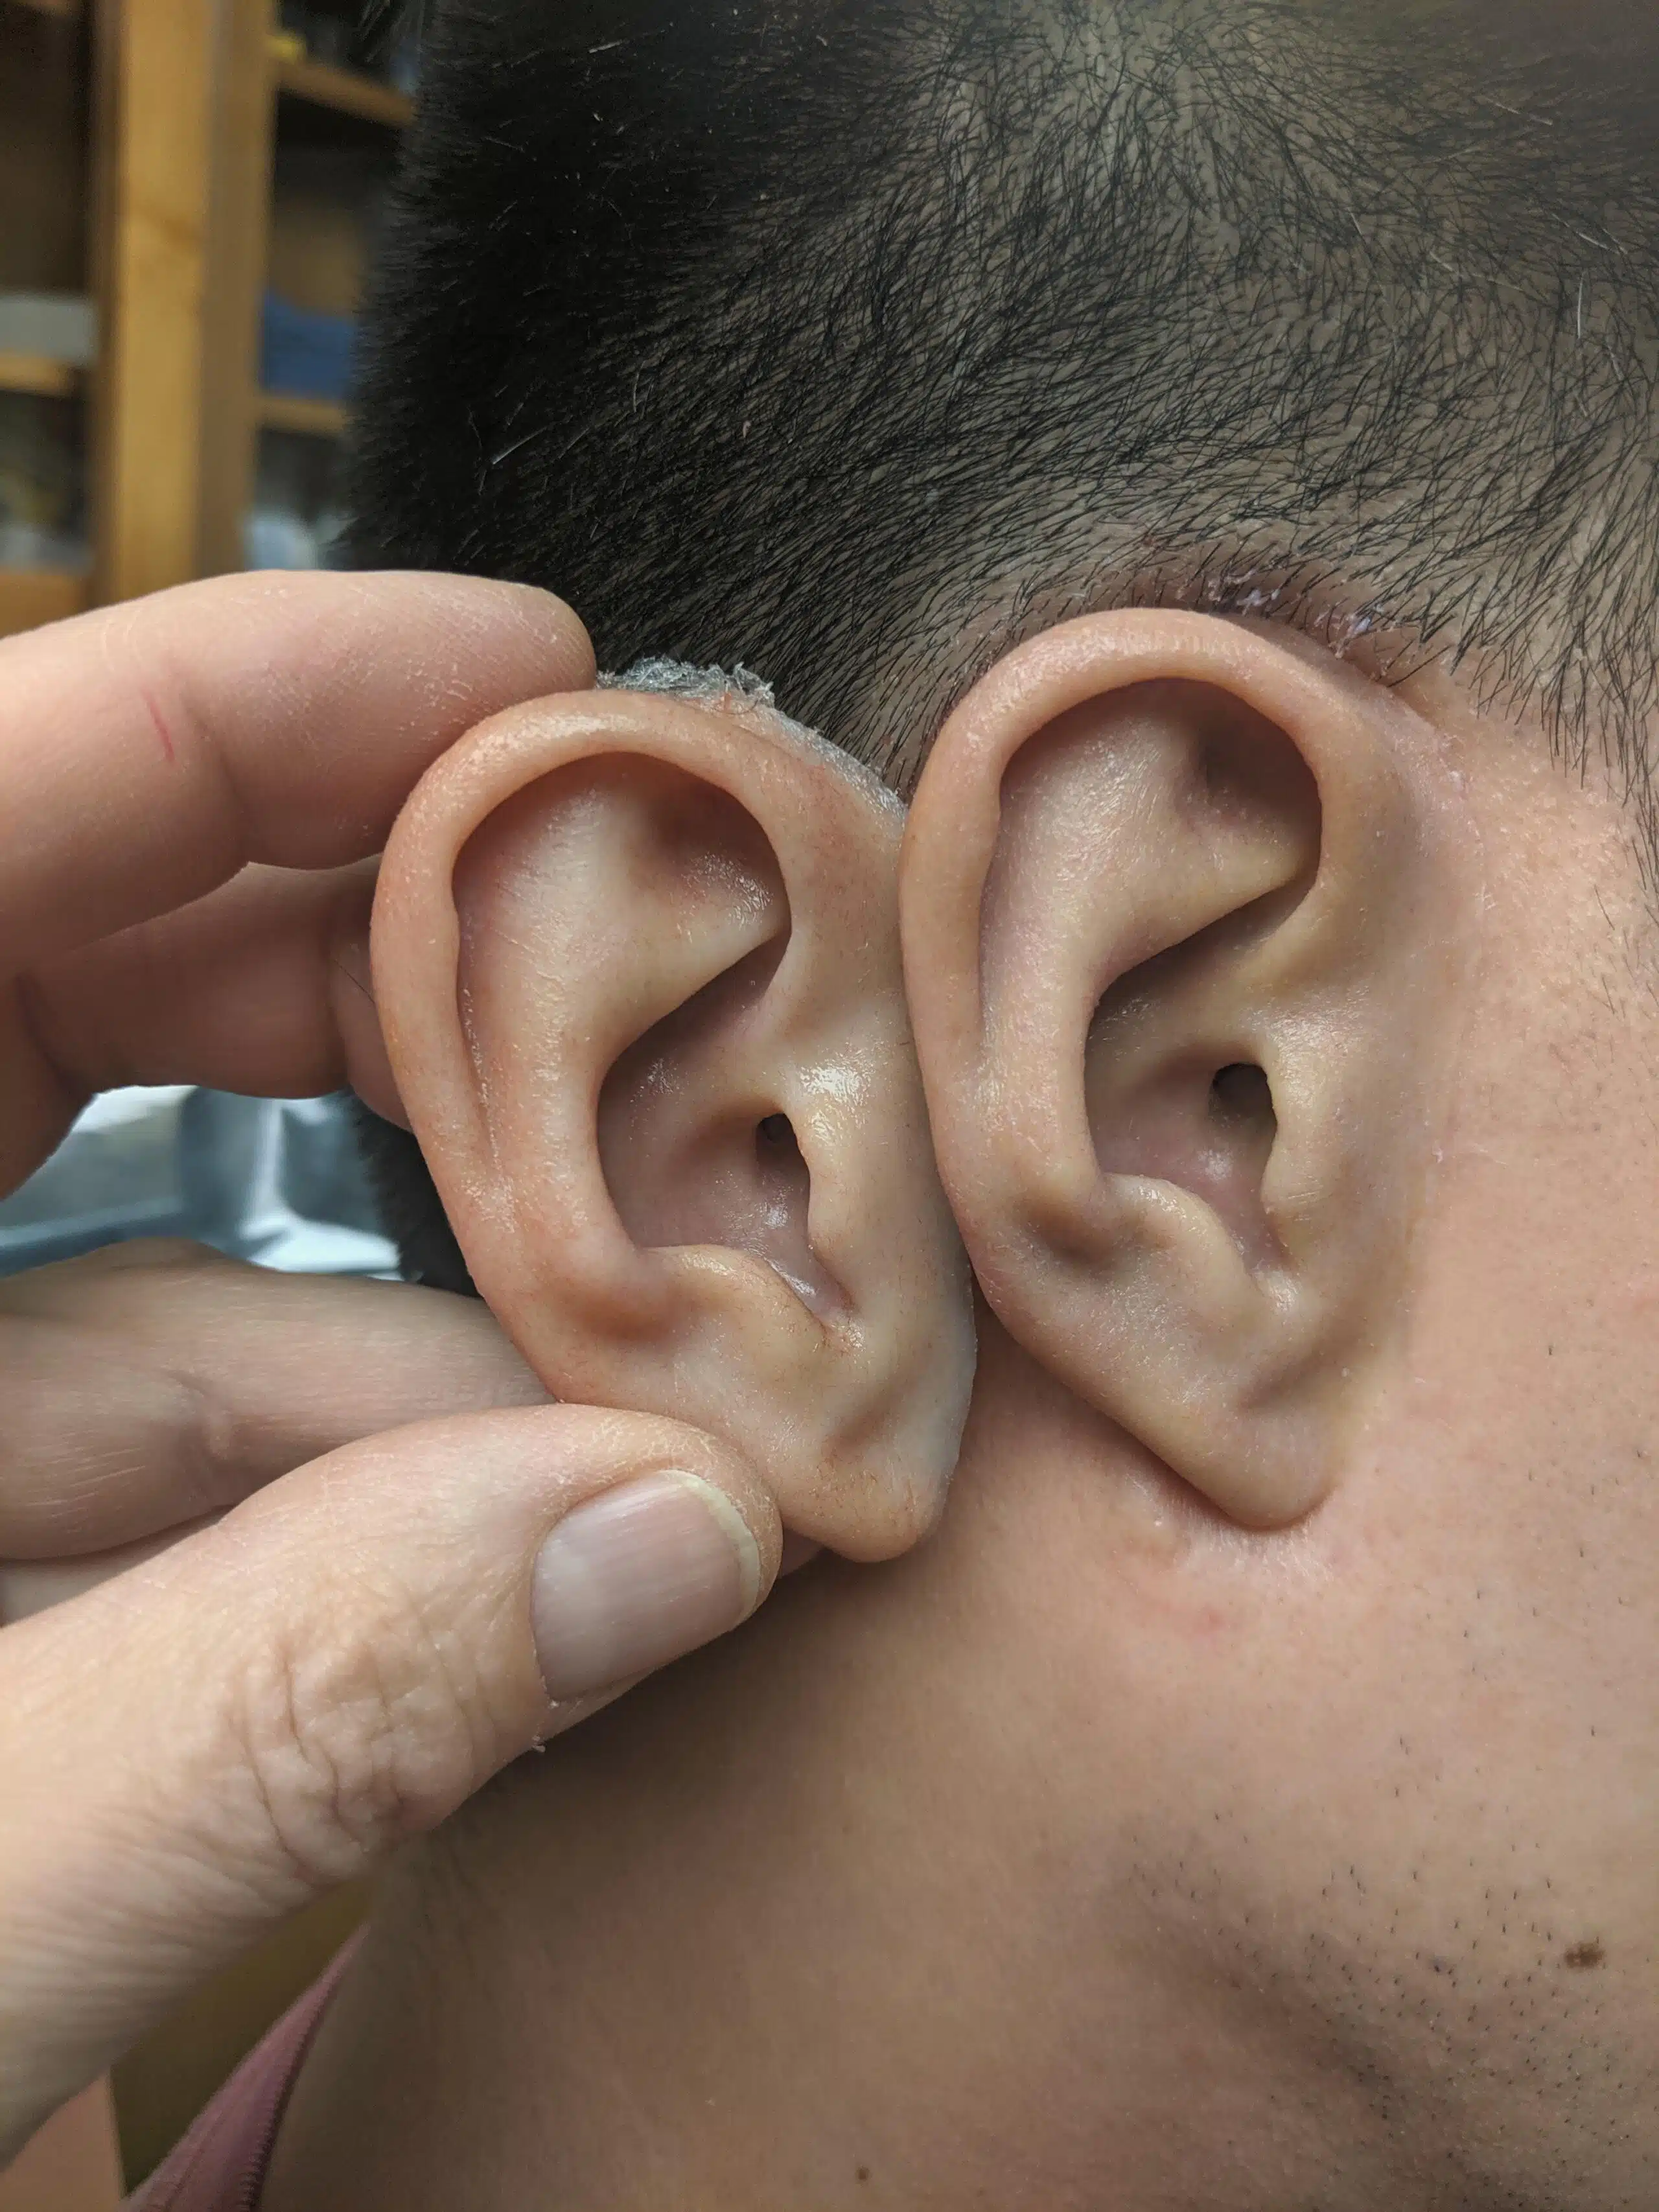 A man with two ears touching each other.